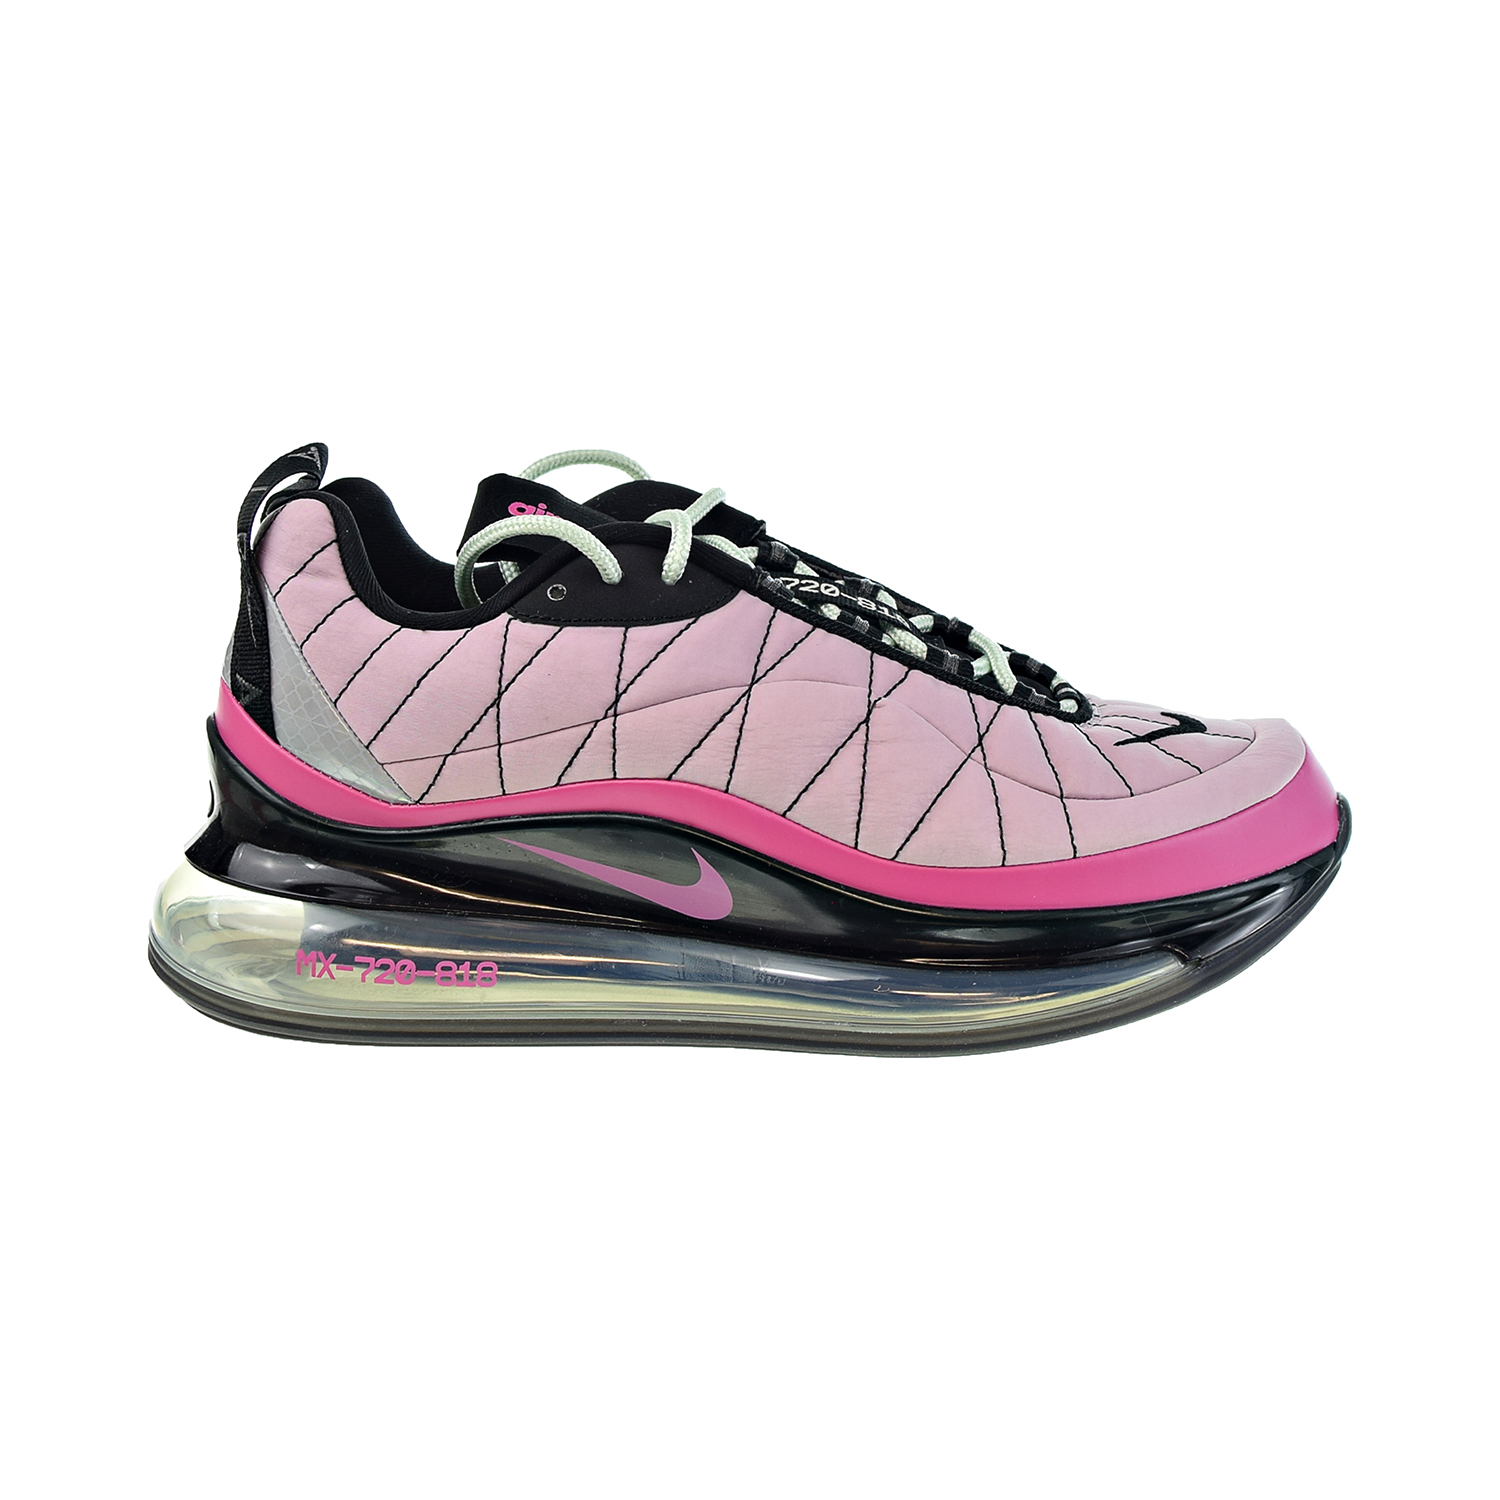 Nike Air Max 720-818 Women's Shoes Iced Lilac-Cosmic Fuchsia ci3869-500 - image 1 of 6